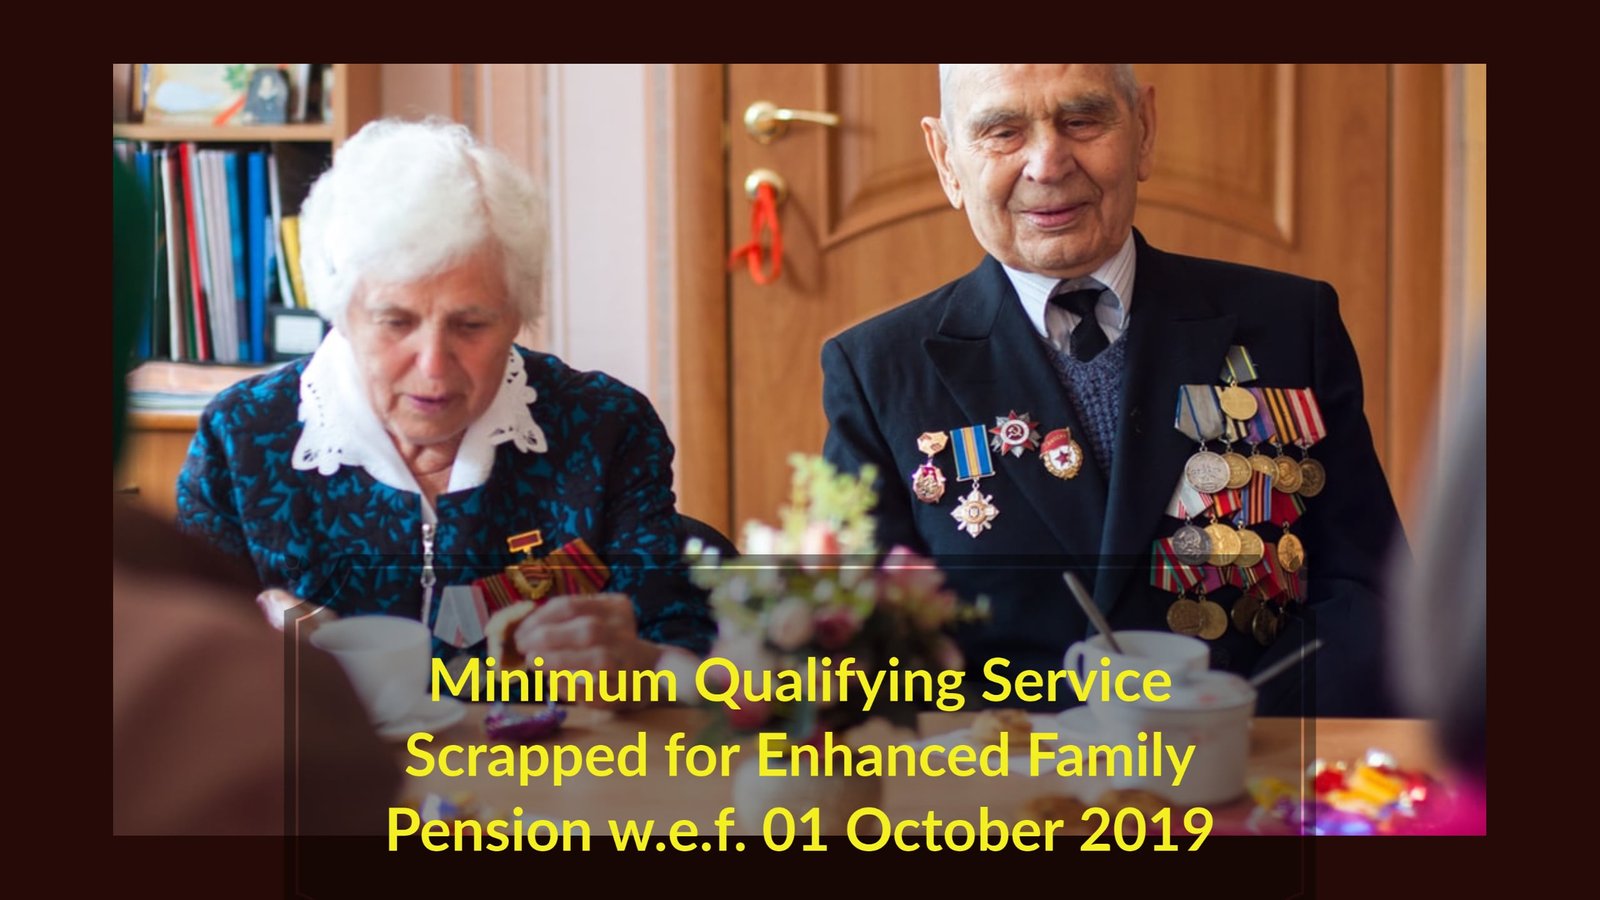 Minimum Qualifying Service Scrapped for Enhanced Family Pension w.e.f. 01 October 2019